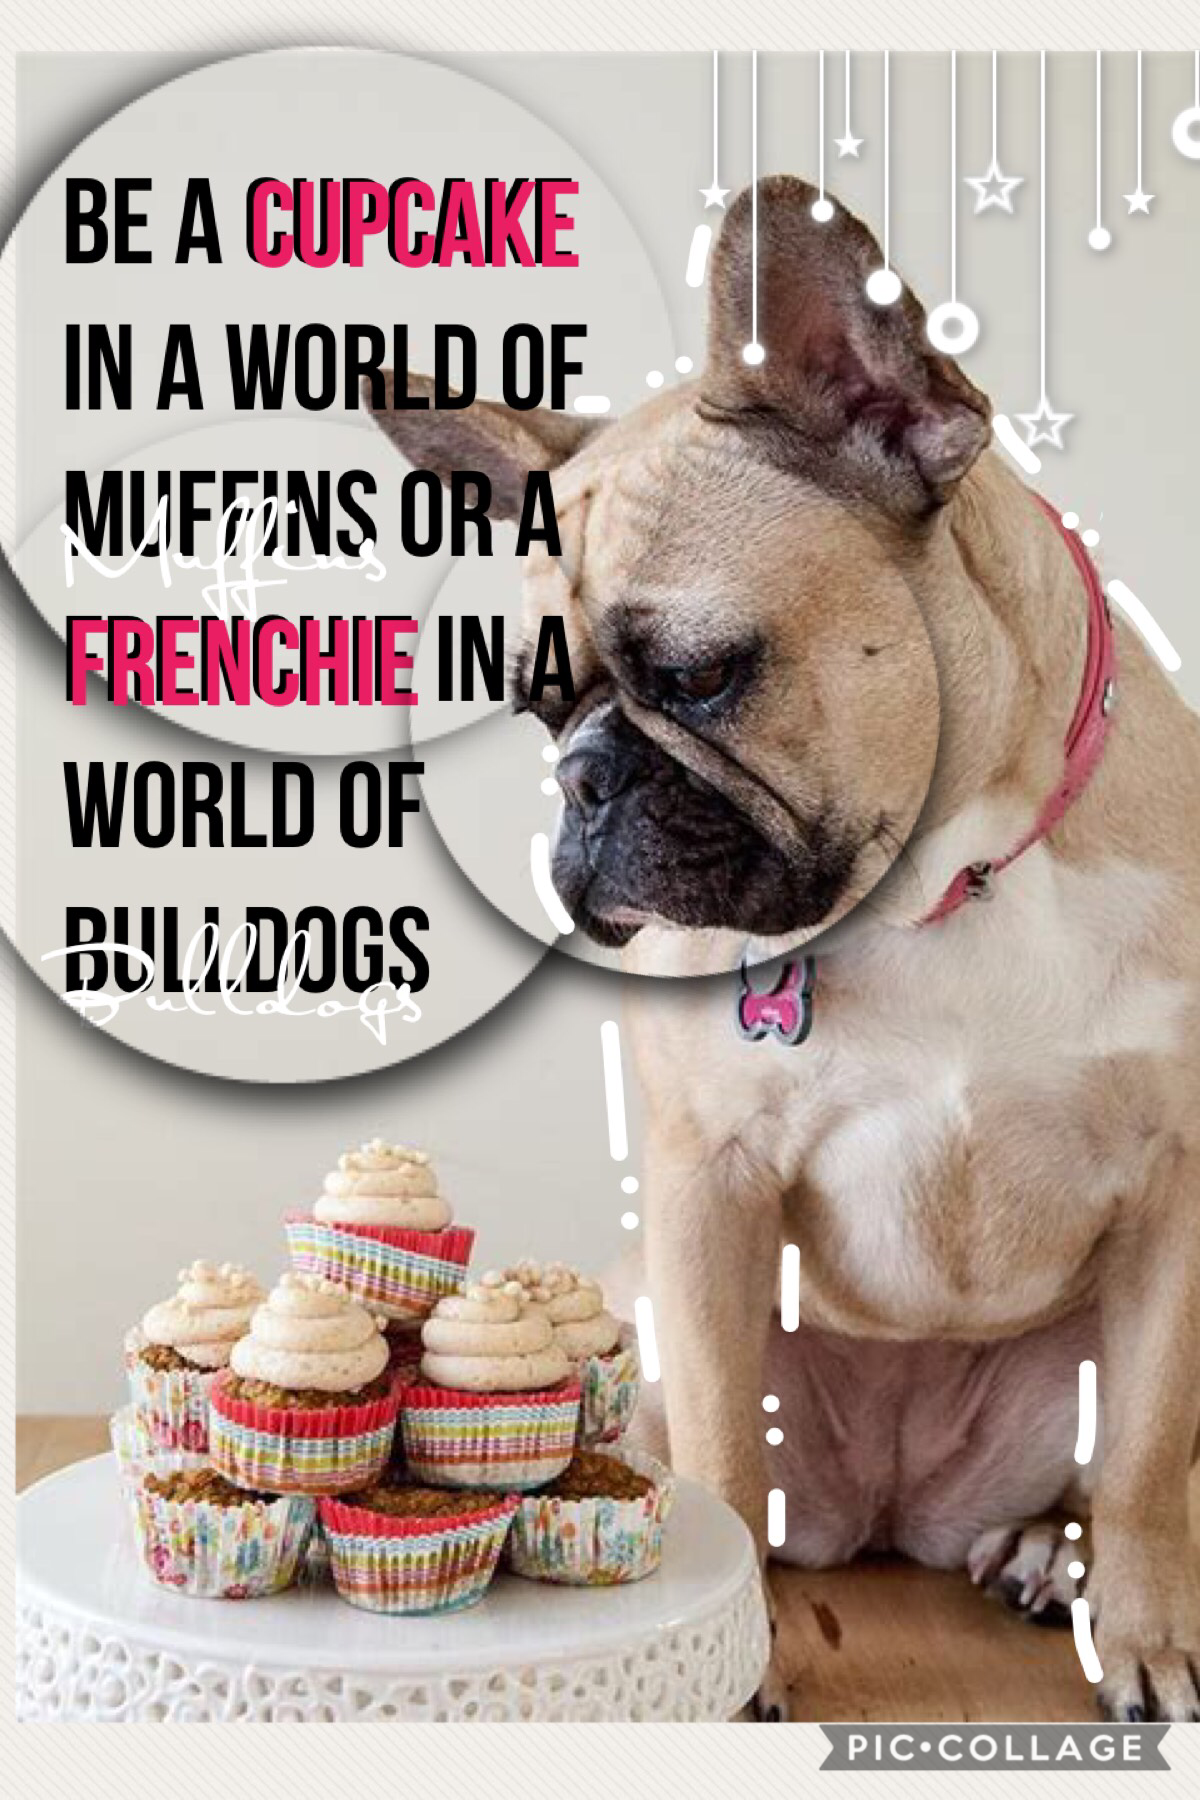 Tap!

Ok first, I love bulldogs and muffins so please no hard feelings and this is my last dog themed post and first cute dessert themed post also, hope you like this one!🐾